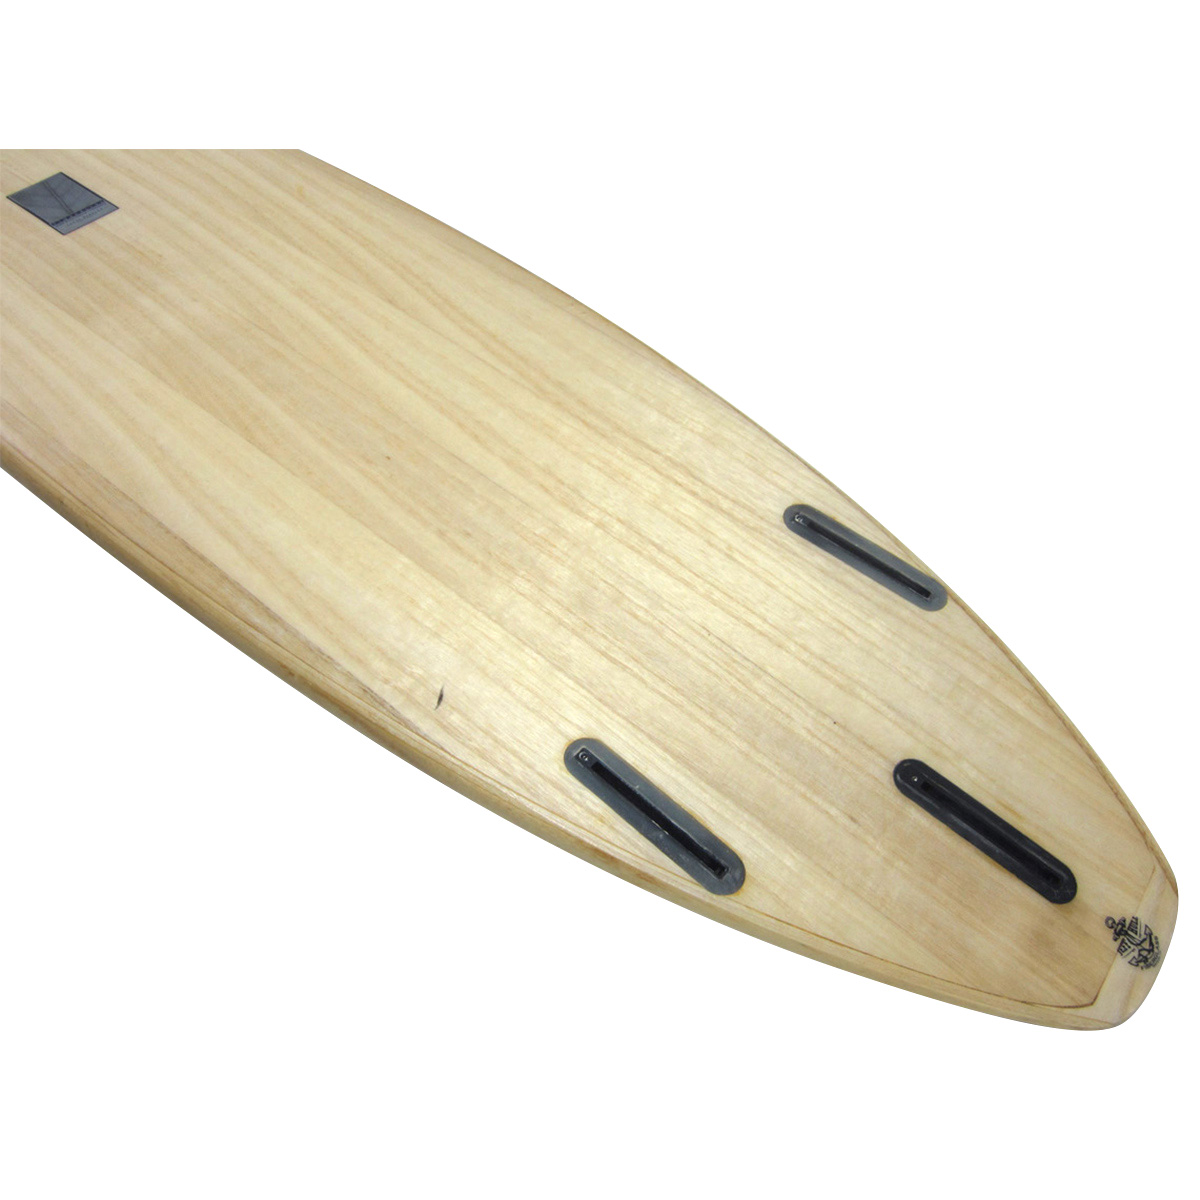 TIMBERLINE SURFBOARDS / TAYSTY WIDE Shaped by JEFF HALL